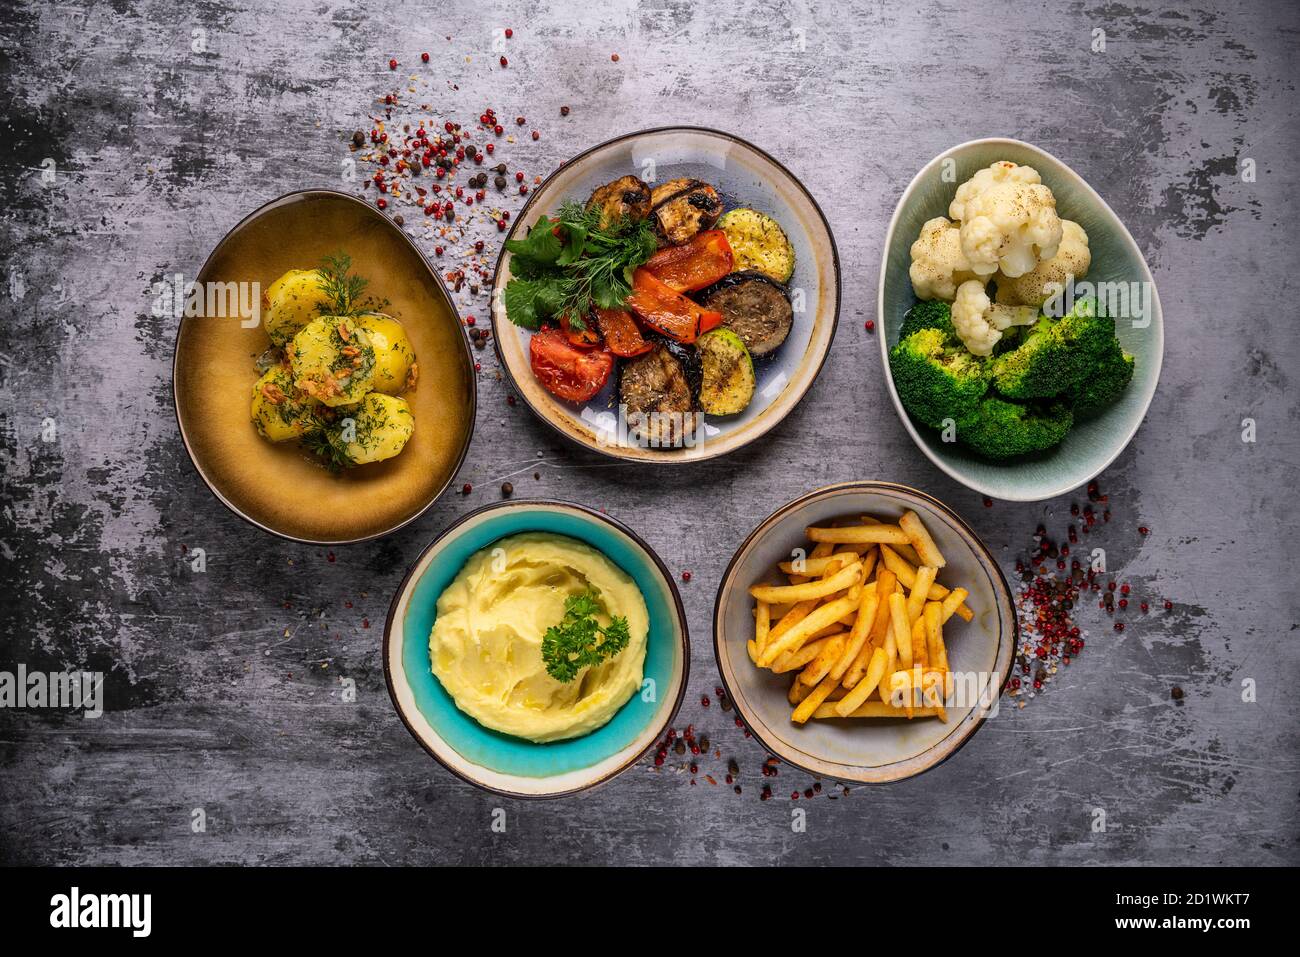 https://c8.alamy.com/comp/2D1WKT7/different-side-dishes-on-a-grey-background-french-fries-mashed-potatoes-rice-vegetables-top-view-2D1WKT7.jpg